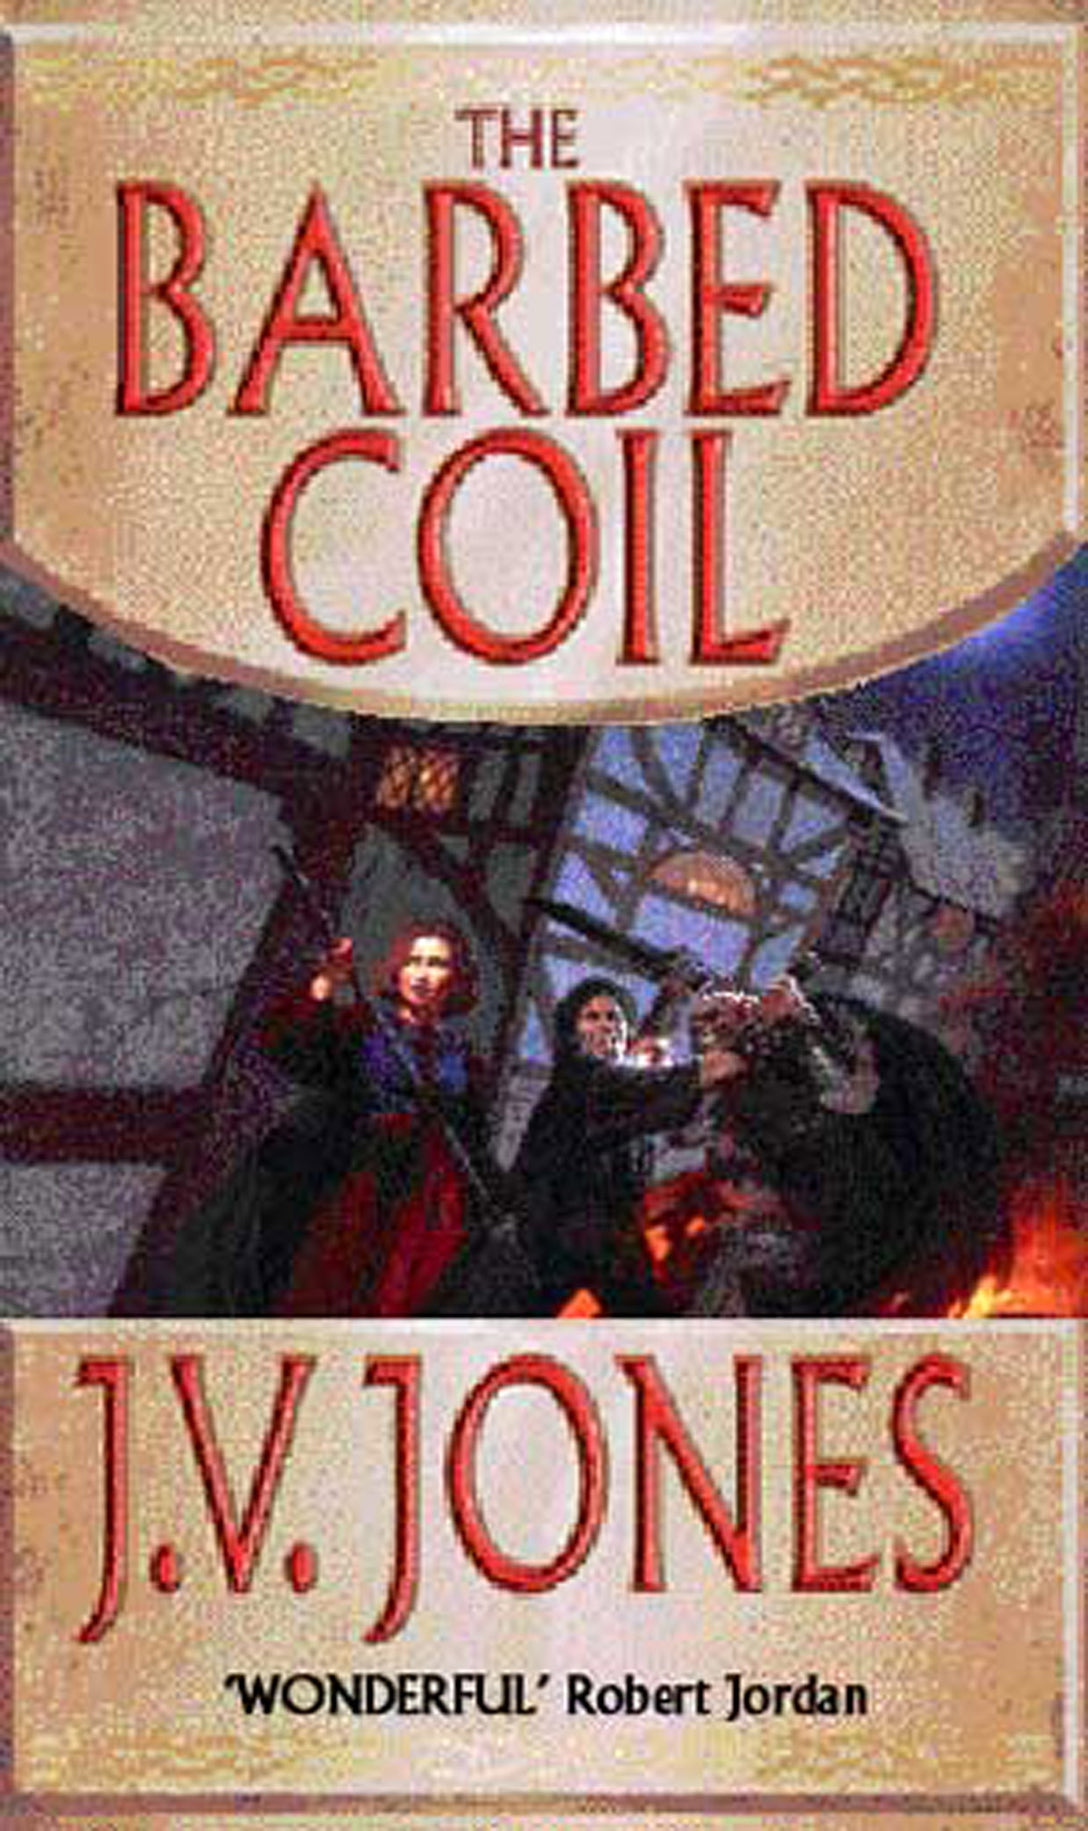 The Barbed Coil by J V Jones